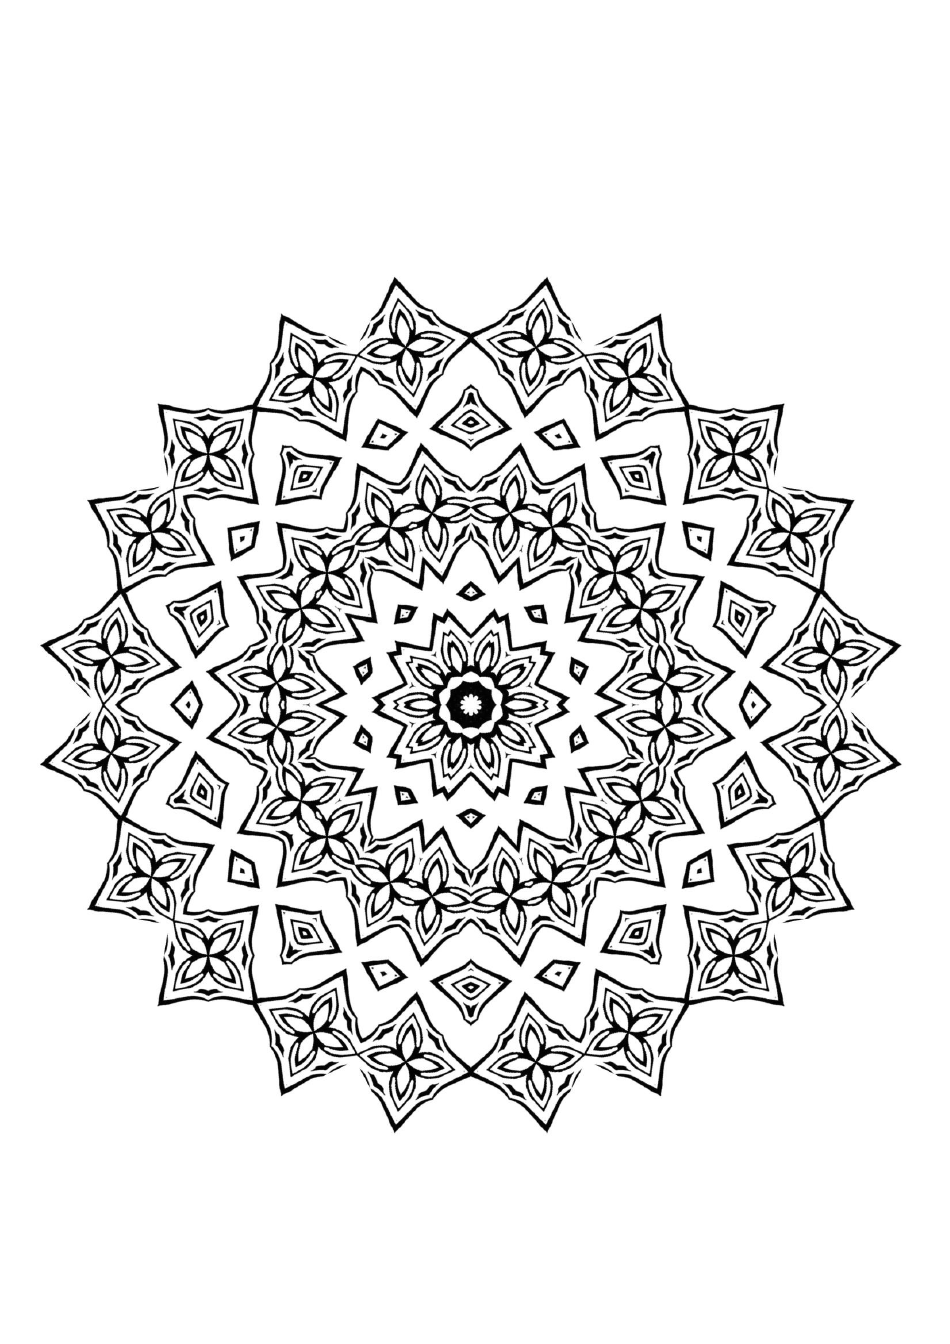 Sun Ornament Coloring Page Flower - Printable PDF Image Preview